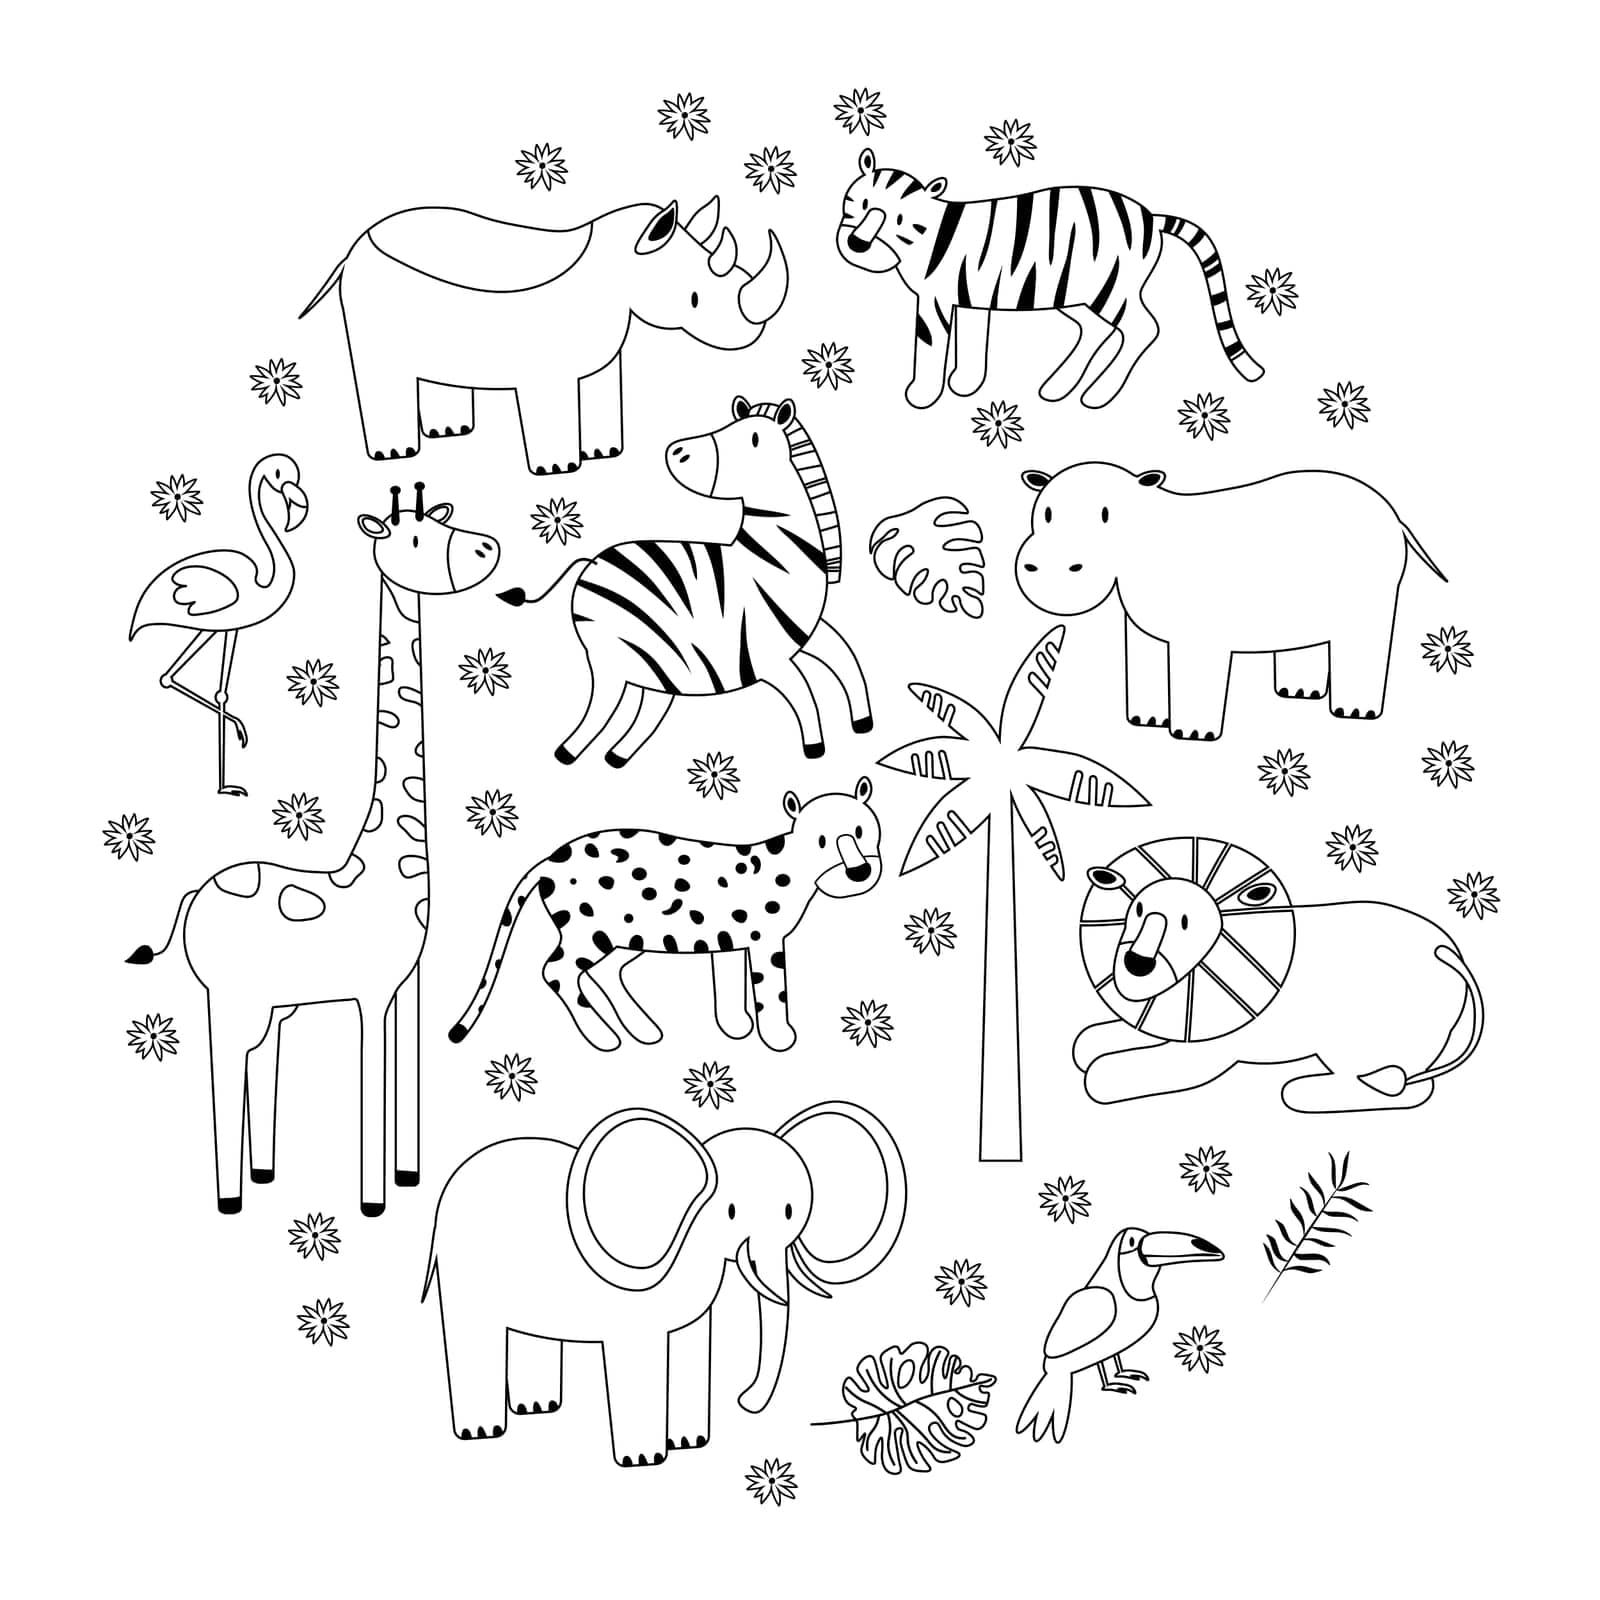 Cartoon animals creatures set African Black and white graphic vector illustration in the line style circle background